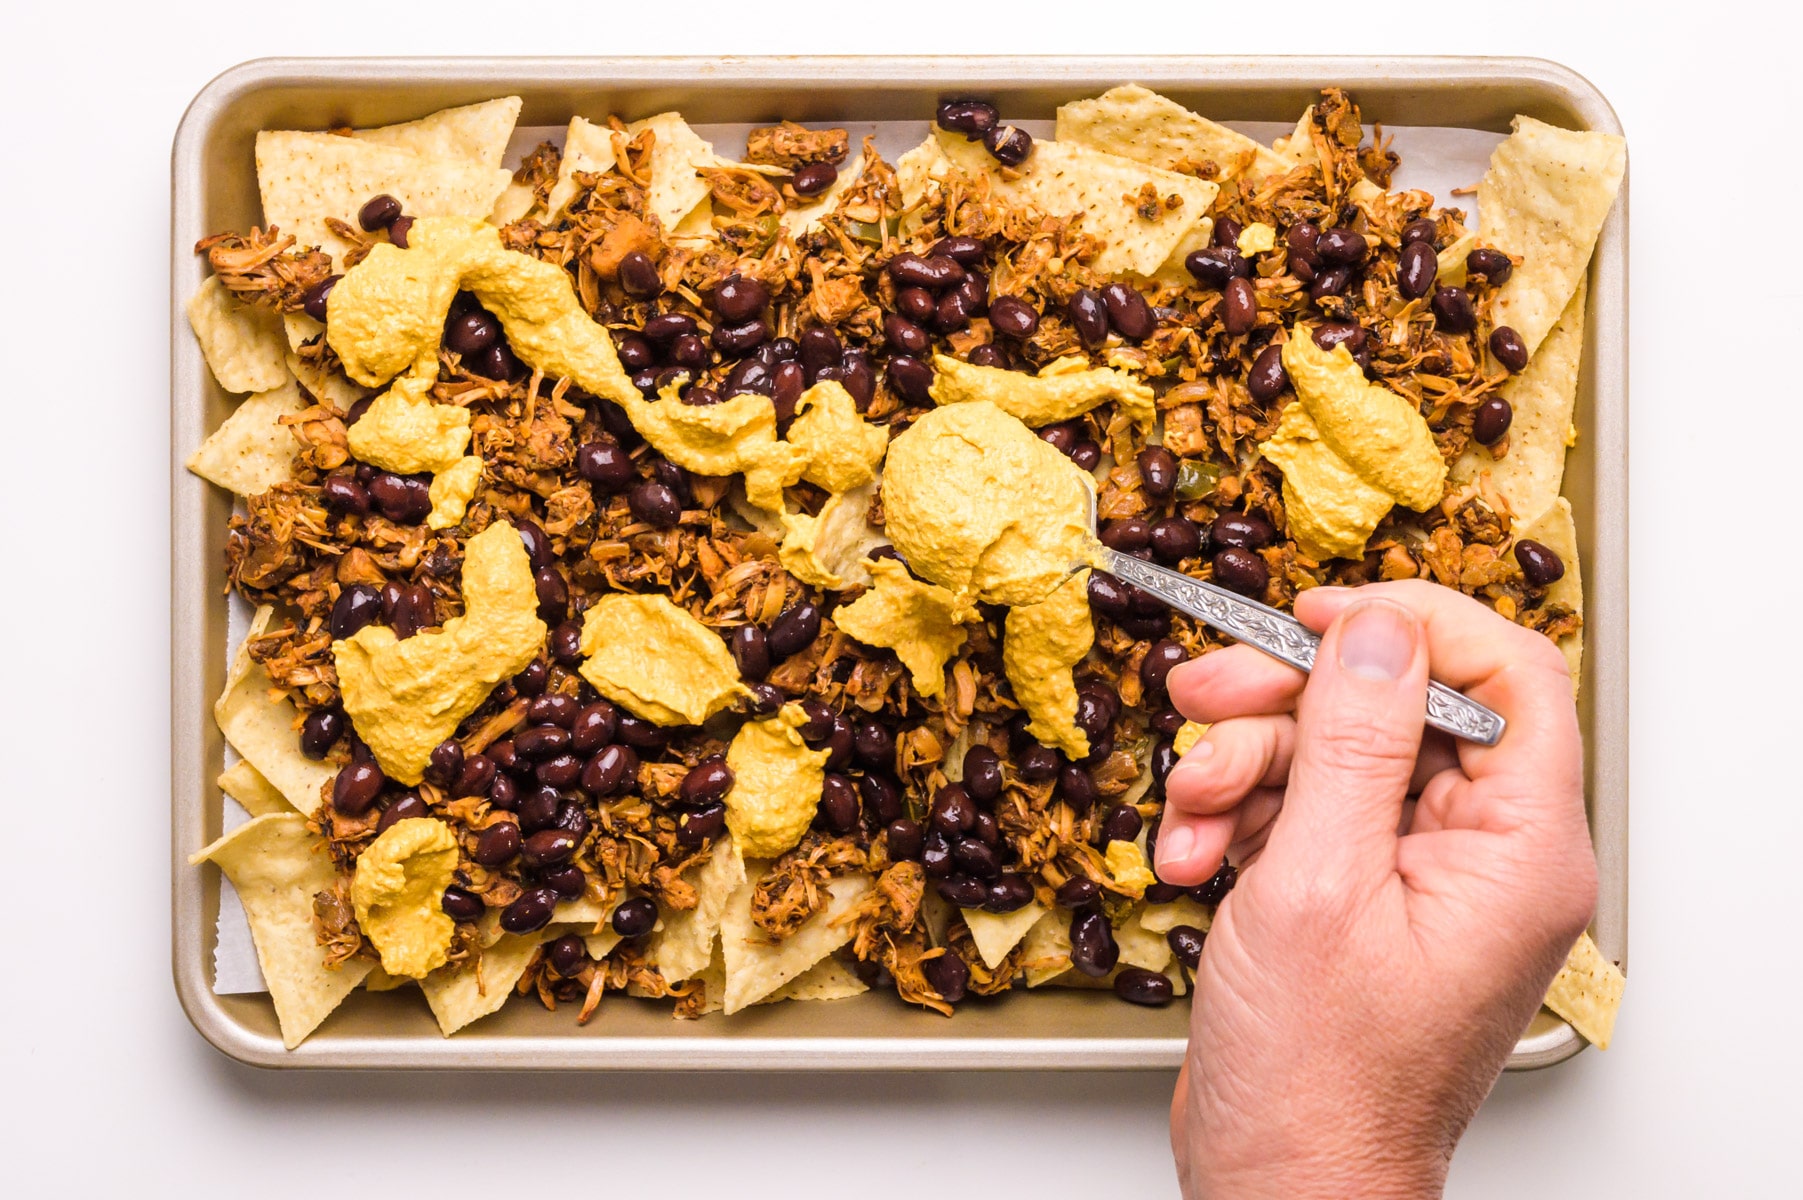 A hand holds a spoon spreading vegan nacho cheese over a pan of nachos.